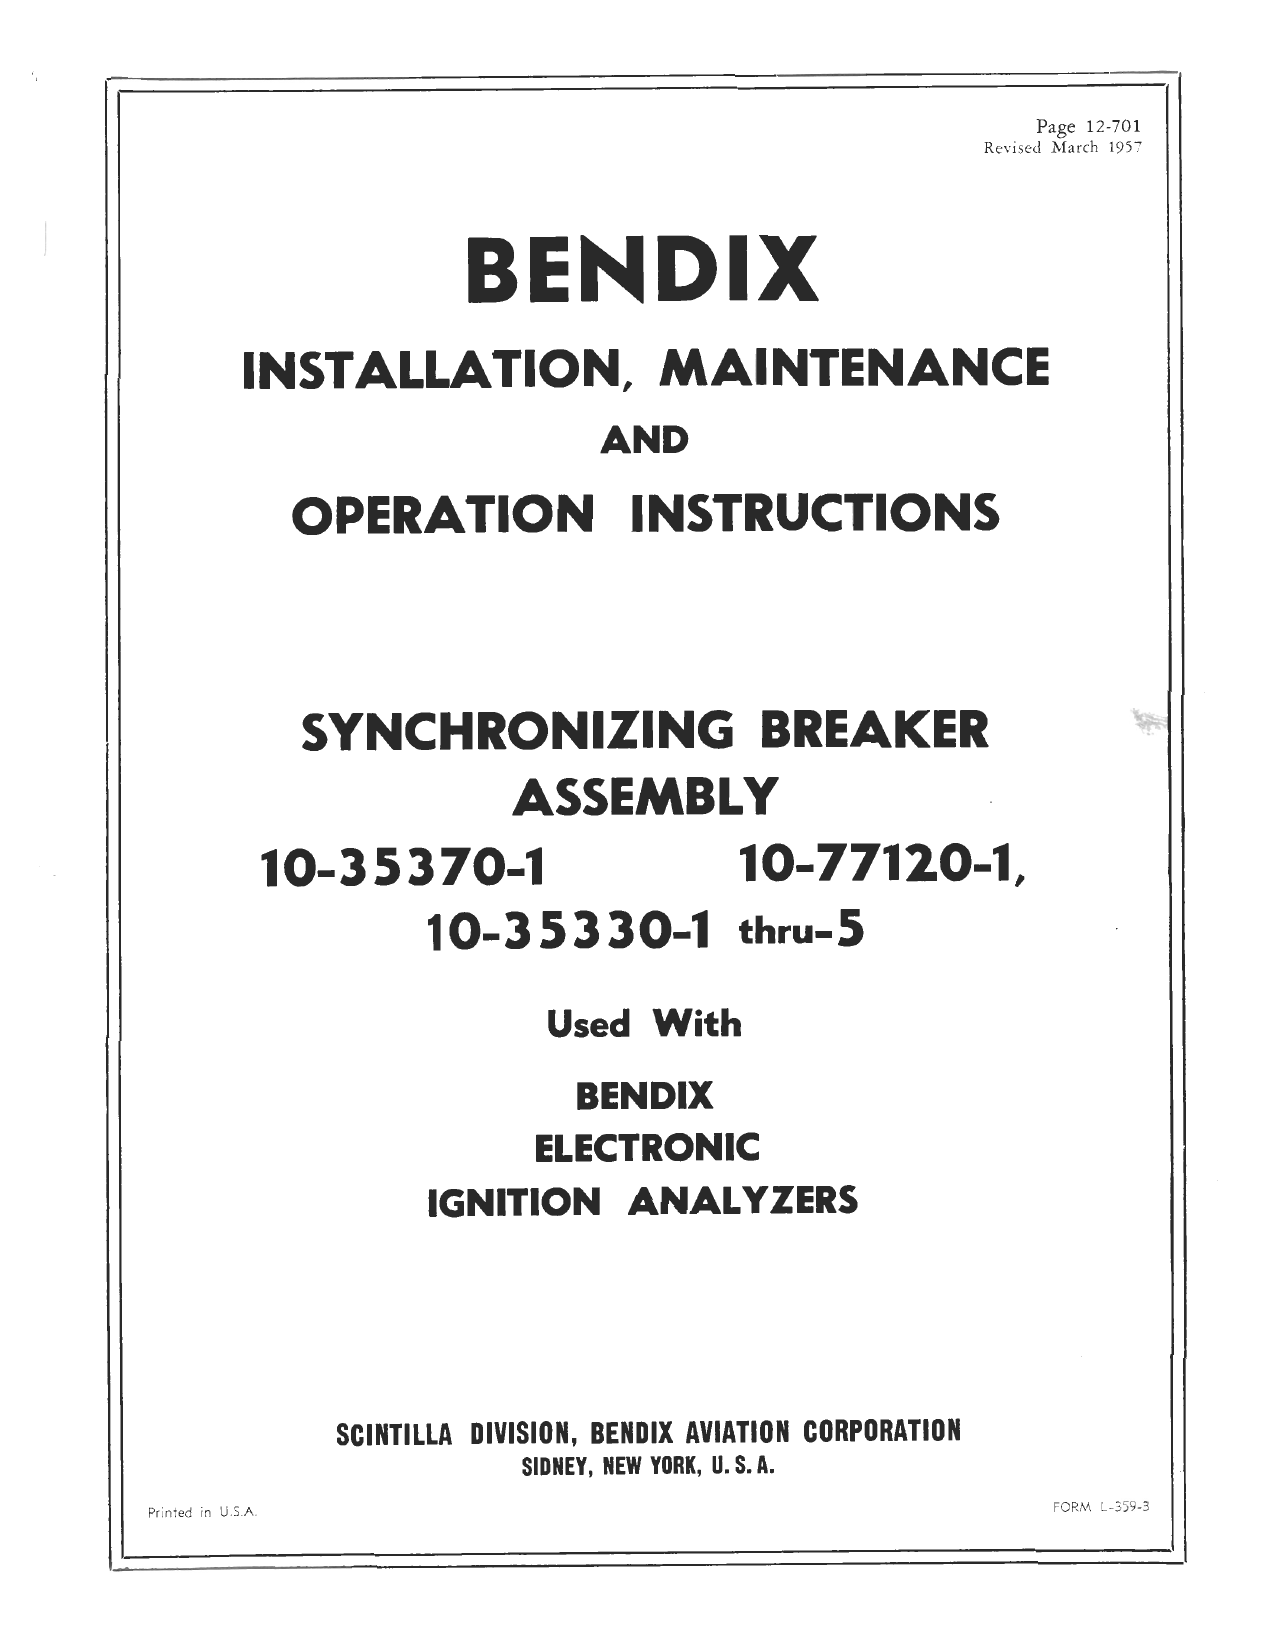 Sample page 1 from AirCorps Library document: Installation, Maintenance and Operation Instructions for Synchronizing Breaker Assembly - 10-35370-1, 10-77120-1, 10-35330-1 thru -5 